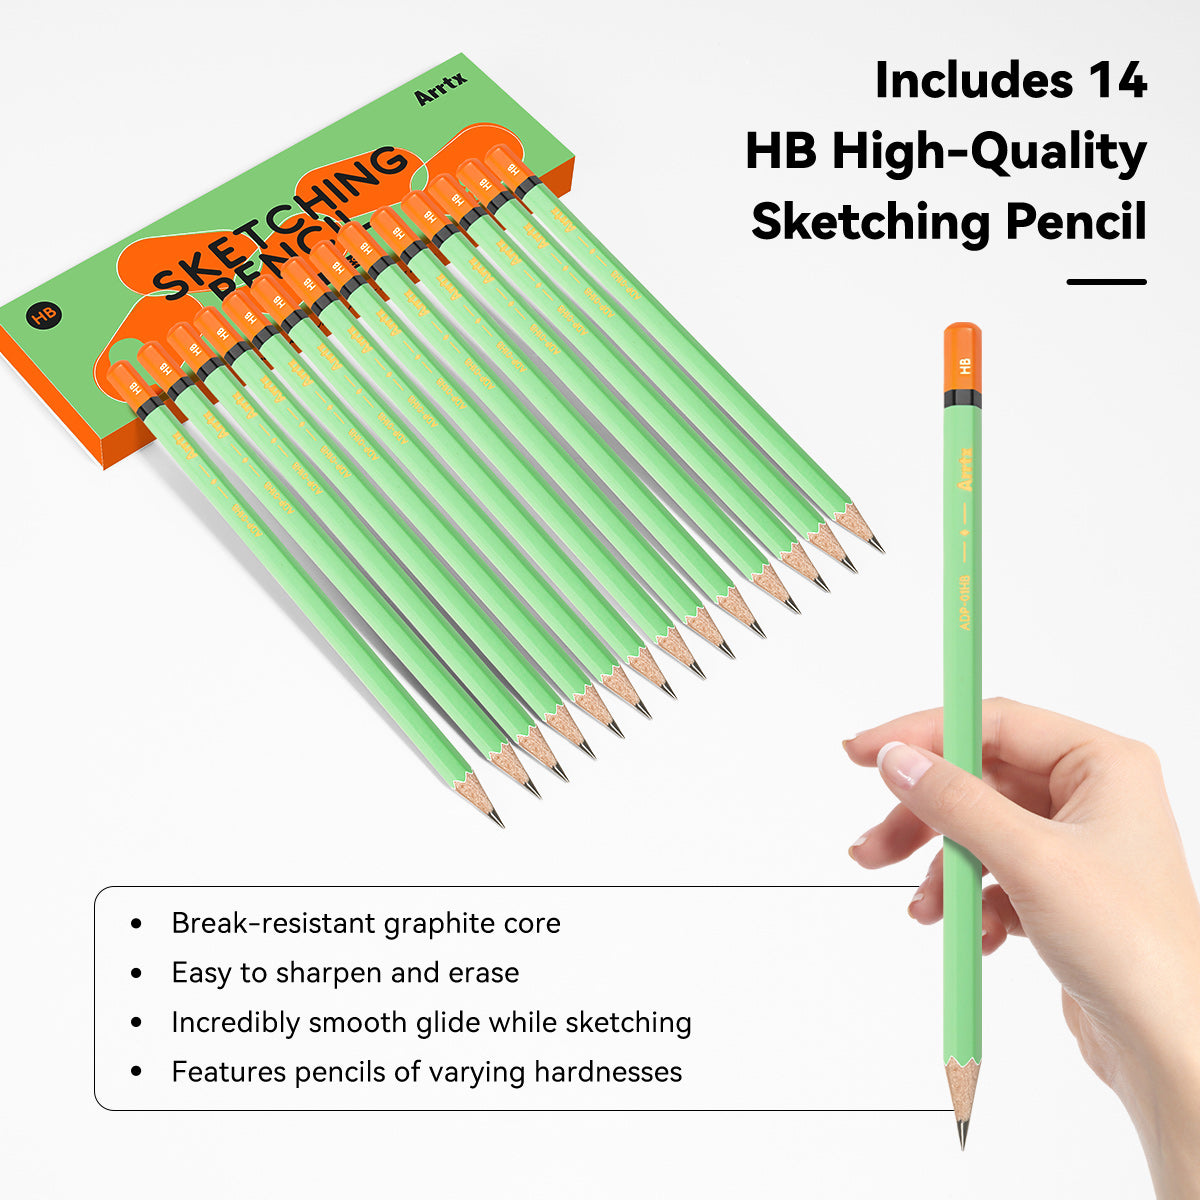  Arrtx Professional Drawing Sketch Pencils, 14 Pack 2B Art Sketching  Pencils for Drawing and Shading